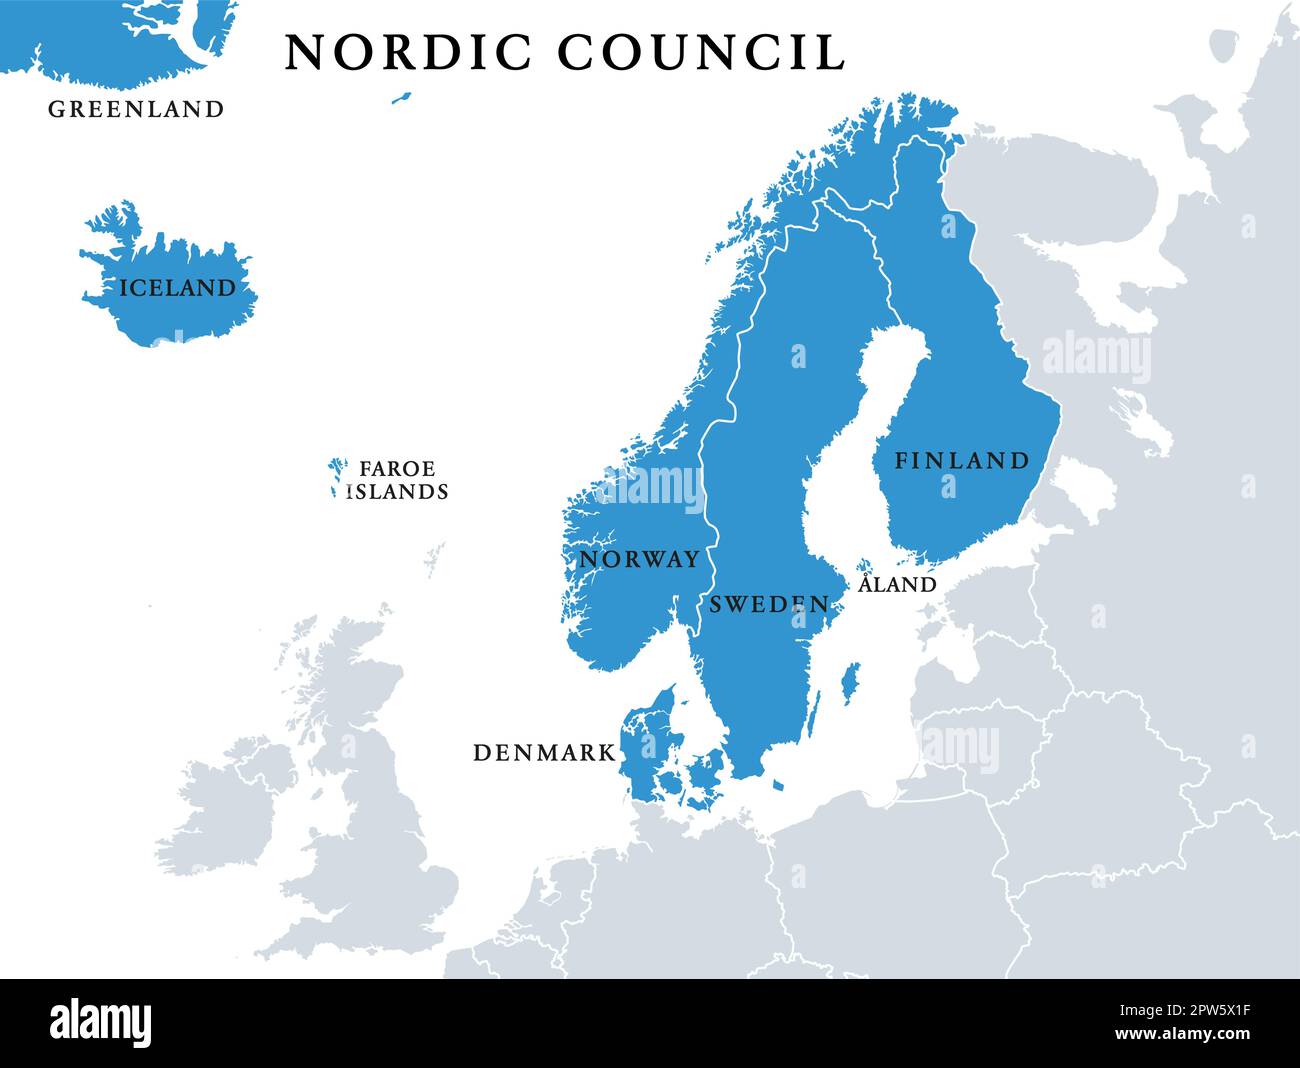 Nordic Council members, Nordic countries cooperation, political map Stock Vector